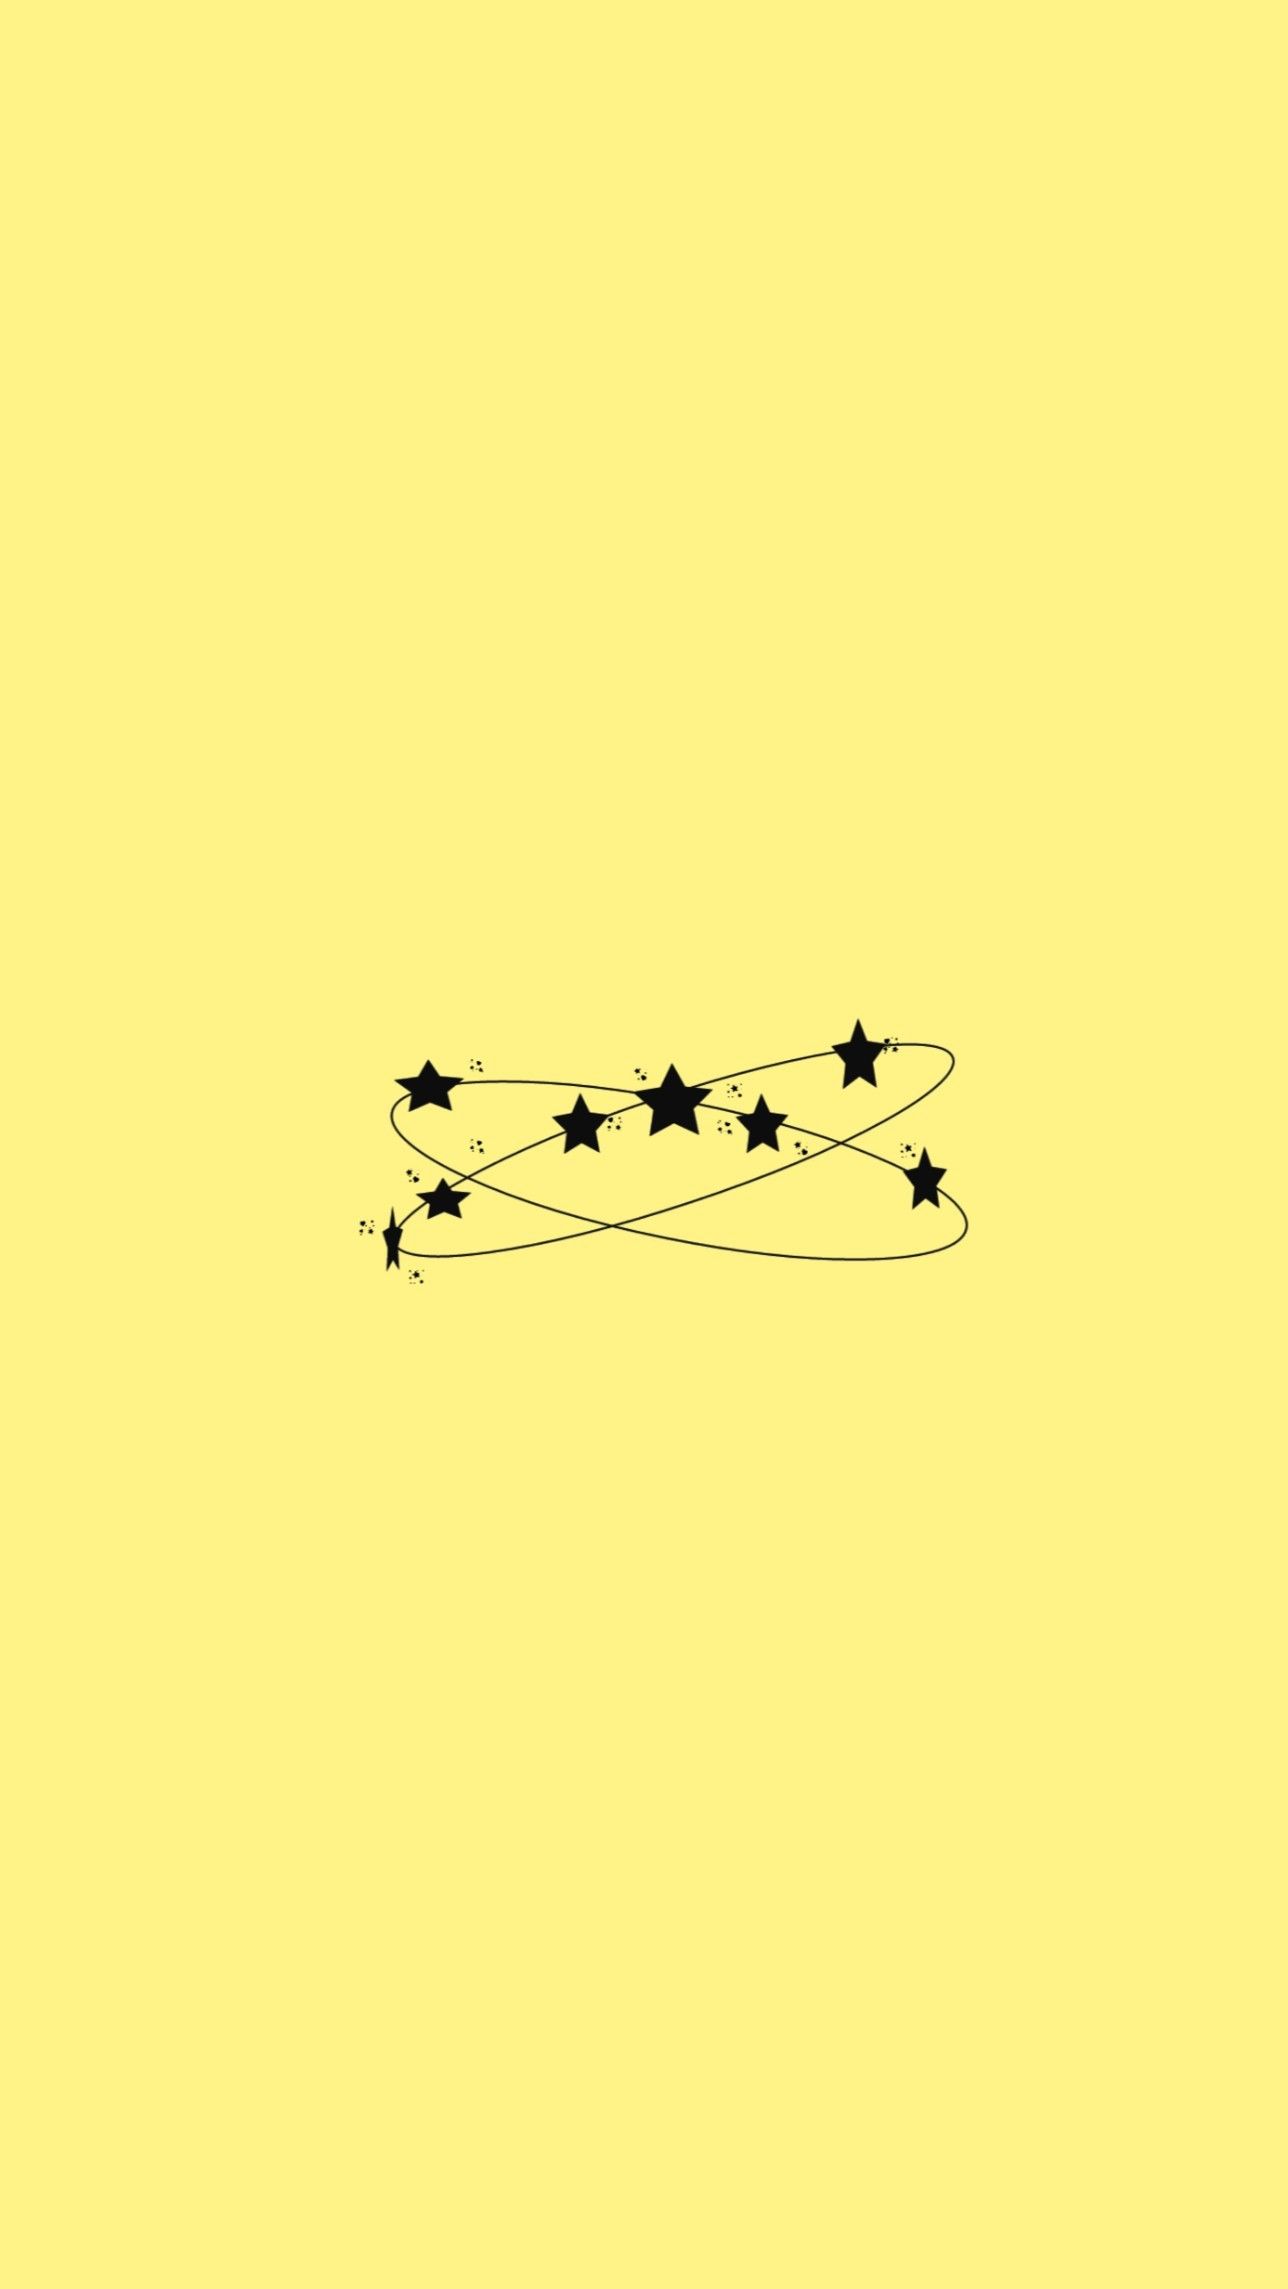 A black and white drawing of stars on yellow background - Yellow, yellow iphone, light yellow